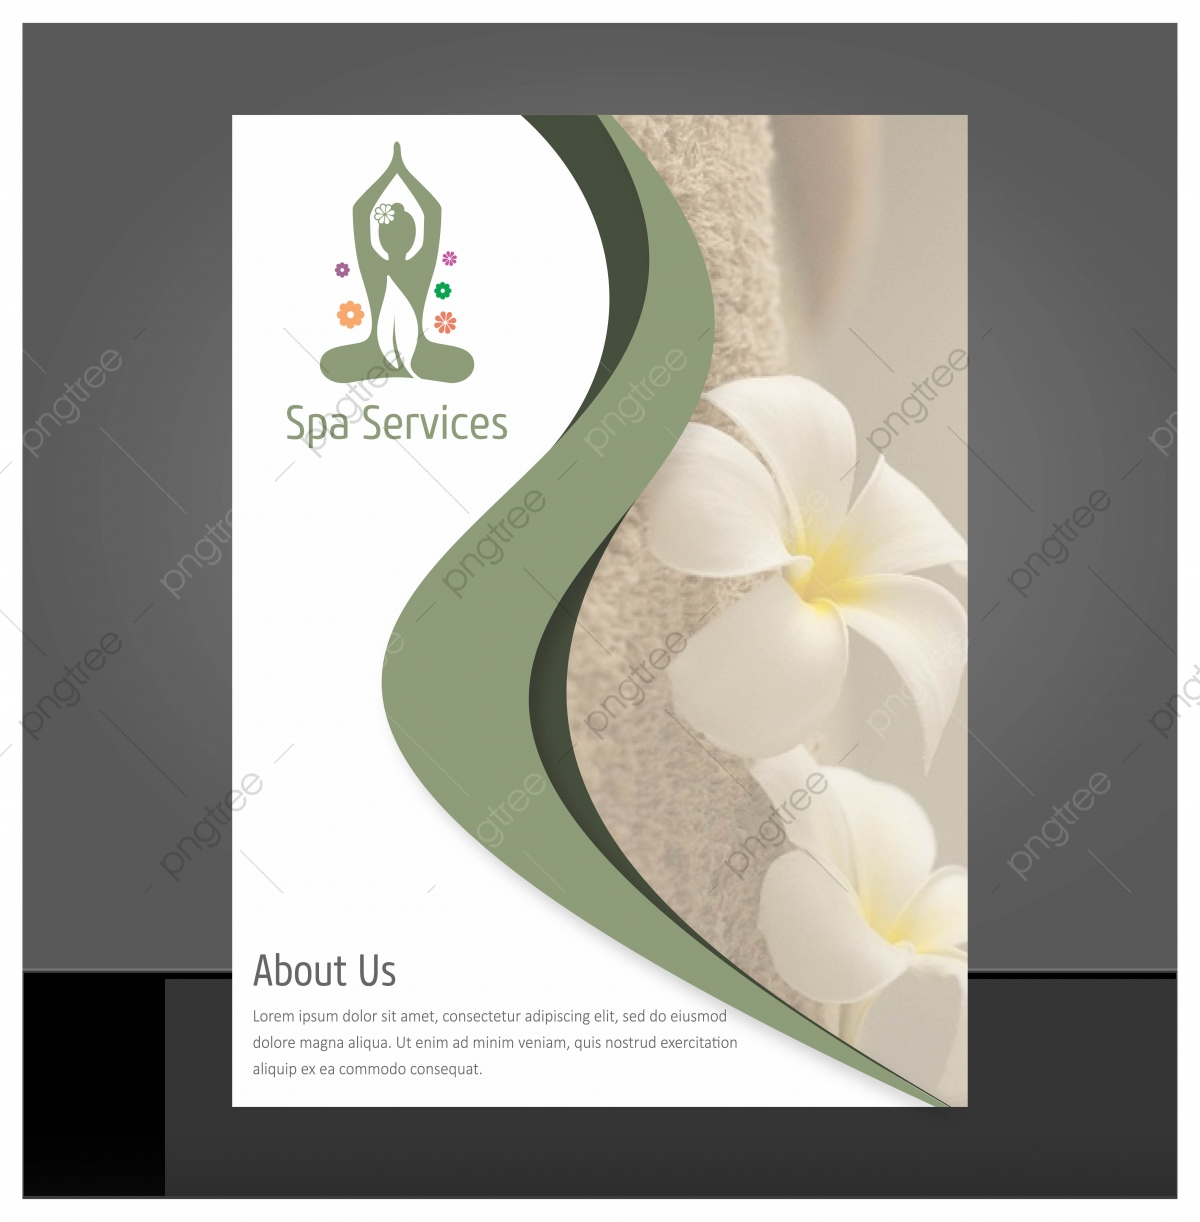 Wellness Brochure Template For Relaxation Healthcare Medical Within Healthcare Brochure Templates Free Download